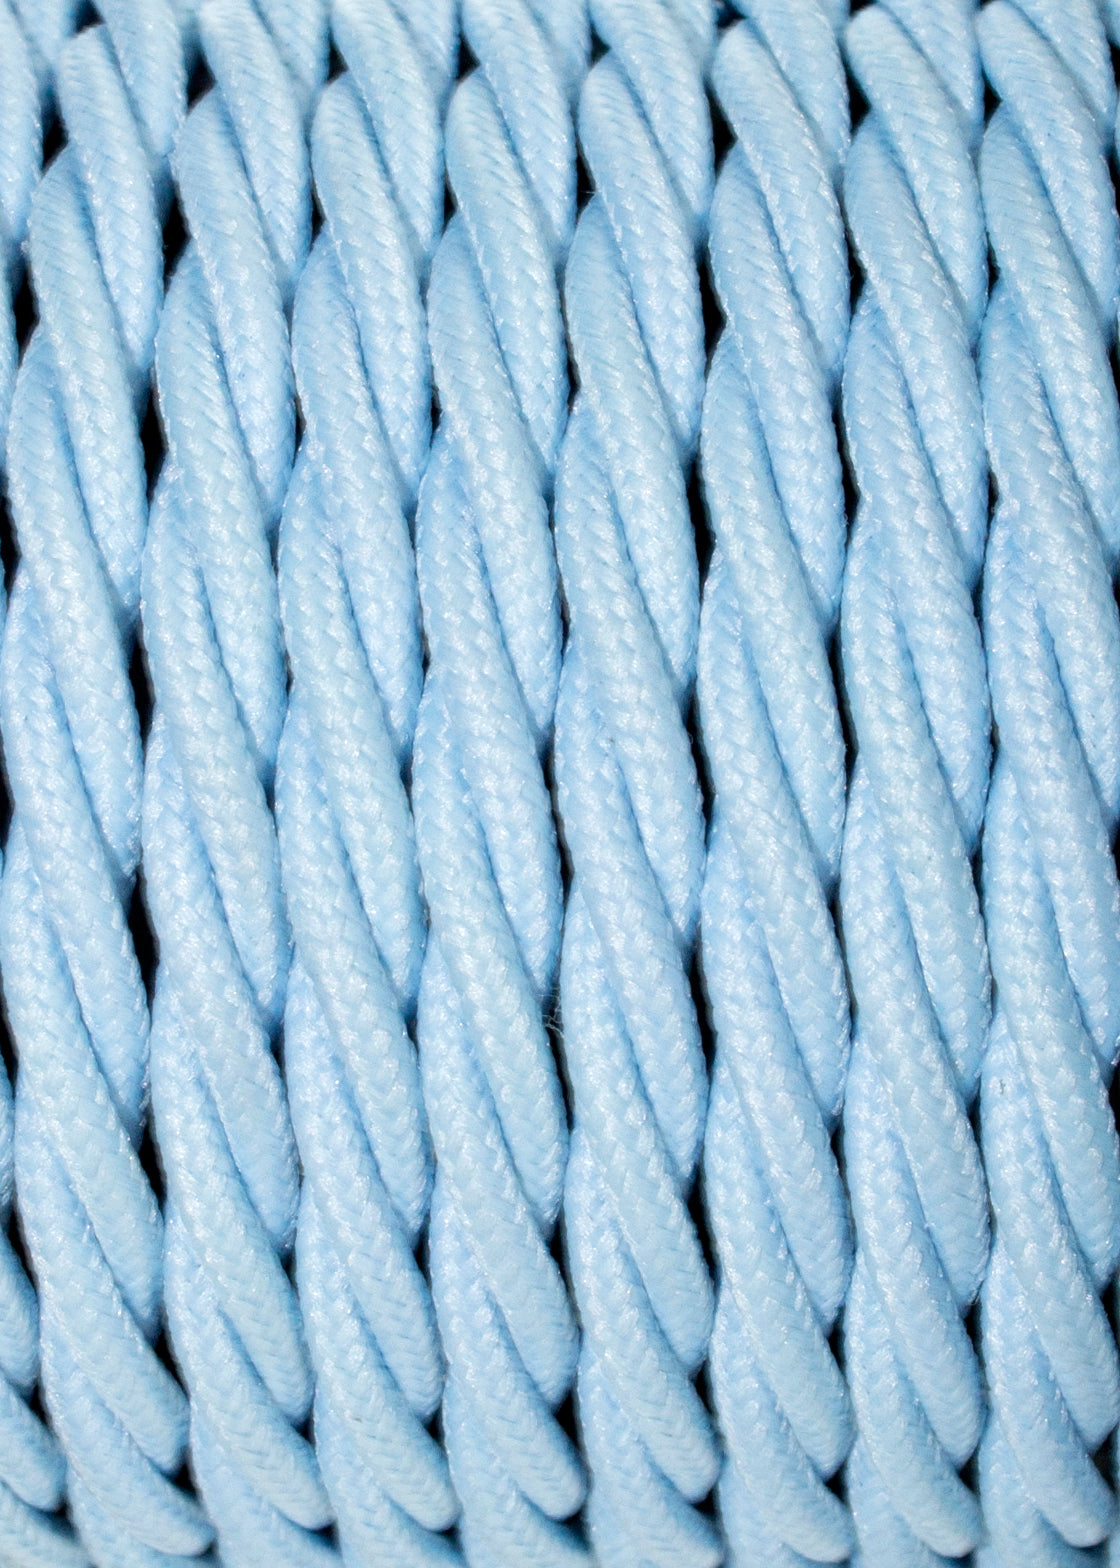 Powder Blue - Lola's Leads Fabric Extension Cable